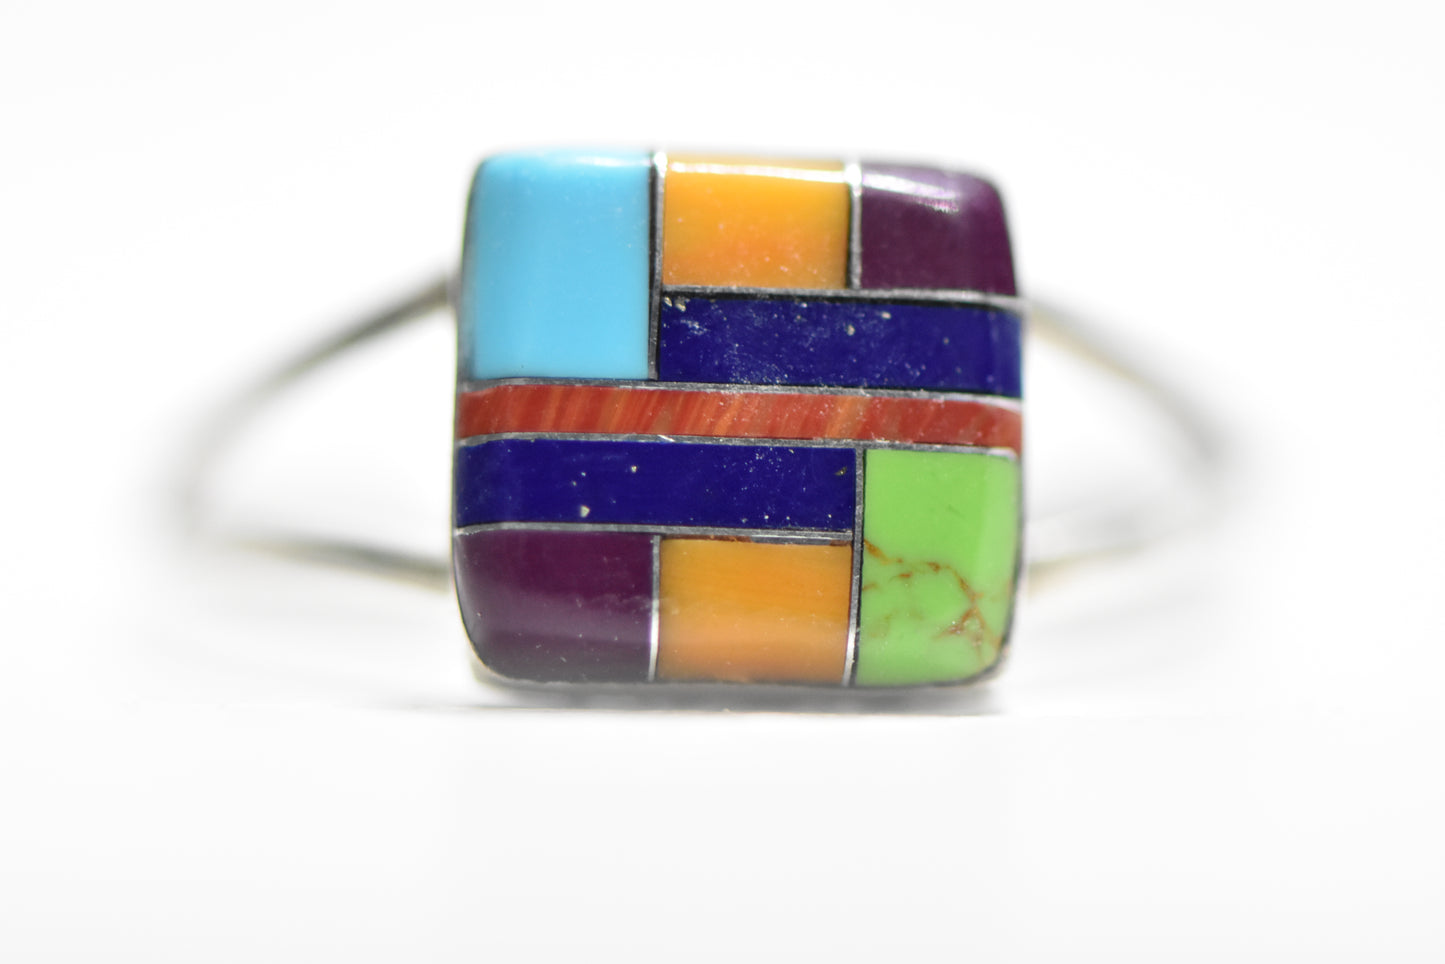 Zuni ring turquoise coral lapis band sterling silver women girls Size 10.25